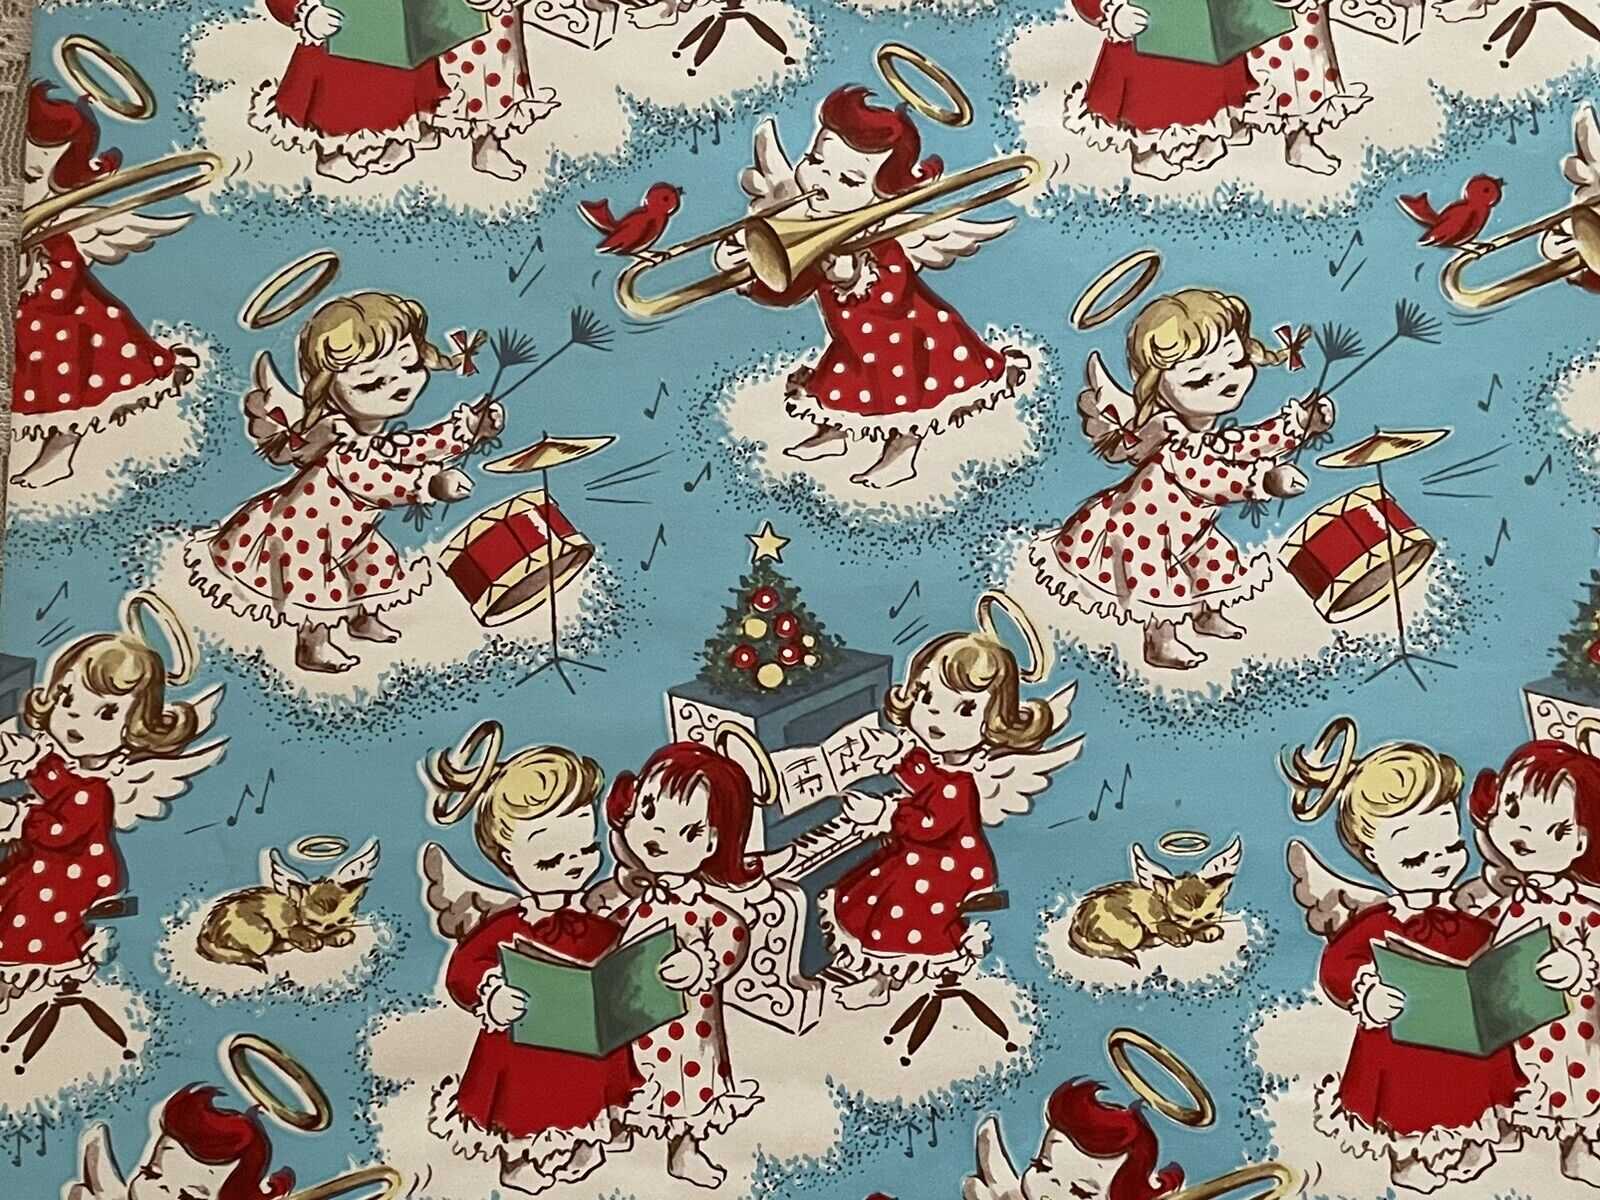 VTG CHRISTMAS WRAPPING PAPER GIFT WRAP ADORABLE MUSICAL ANGELS ON CLOUDS